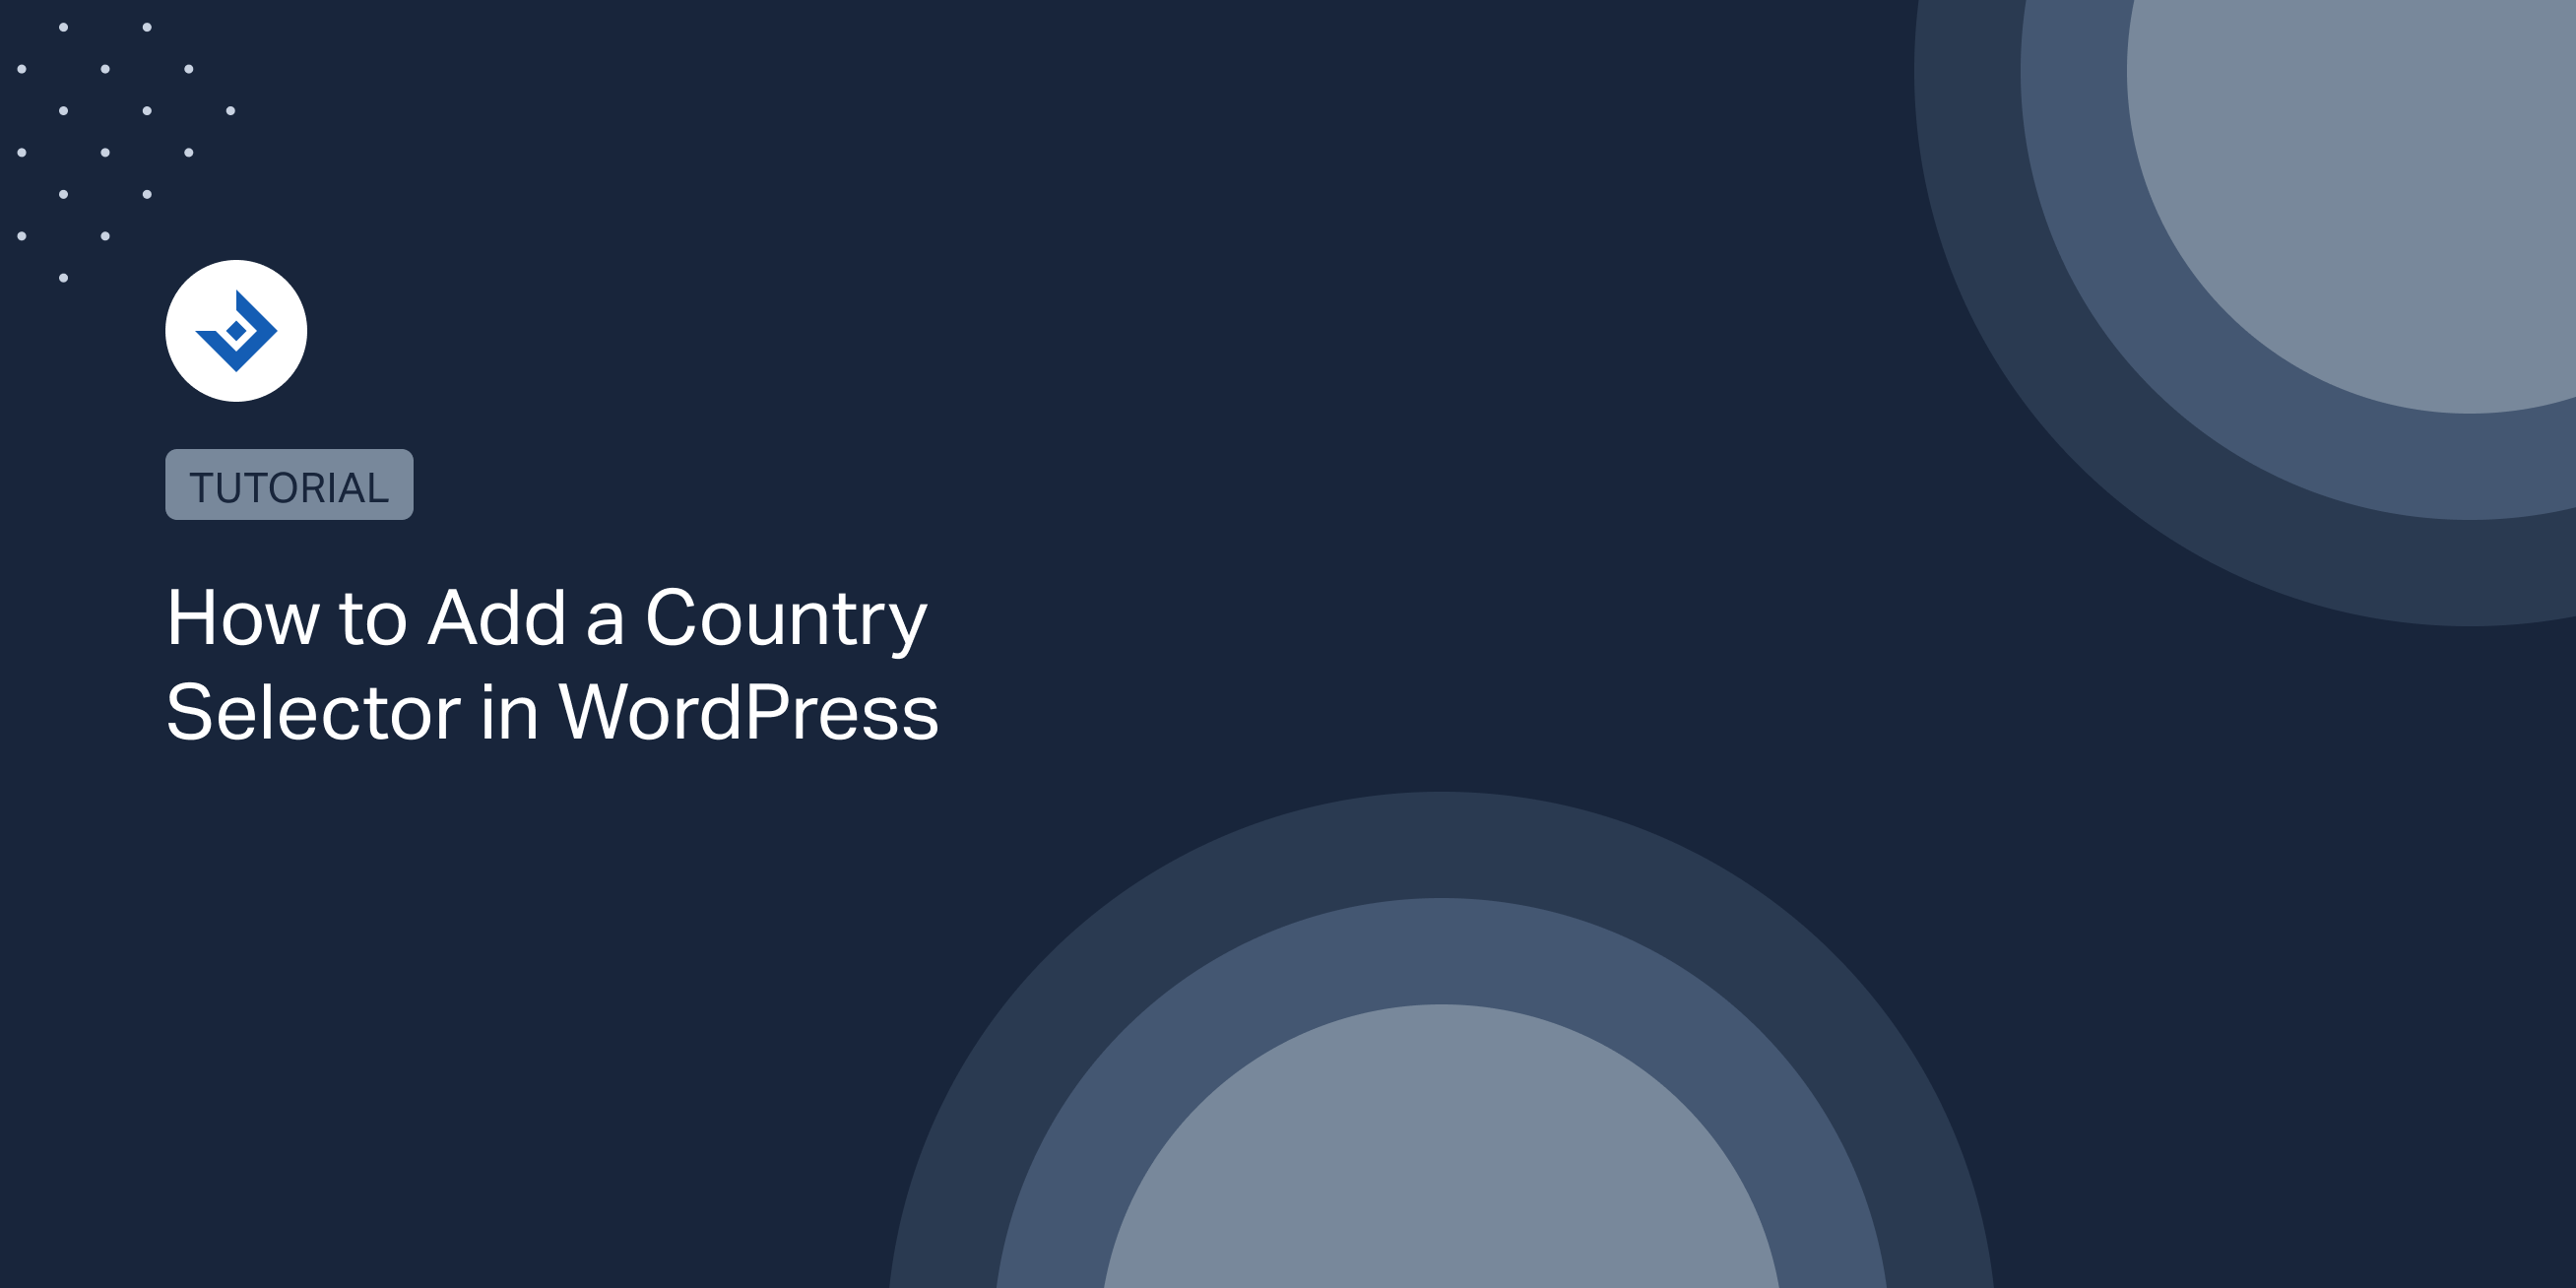 How to Add a Country Selector in WordPress